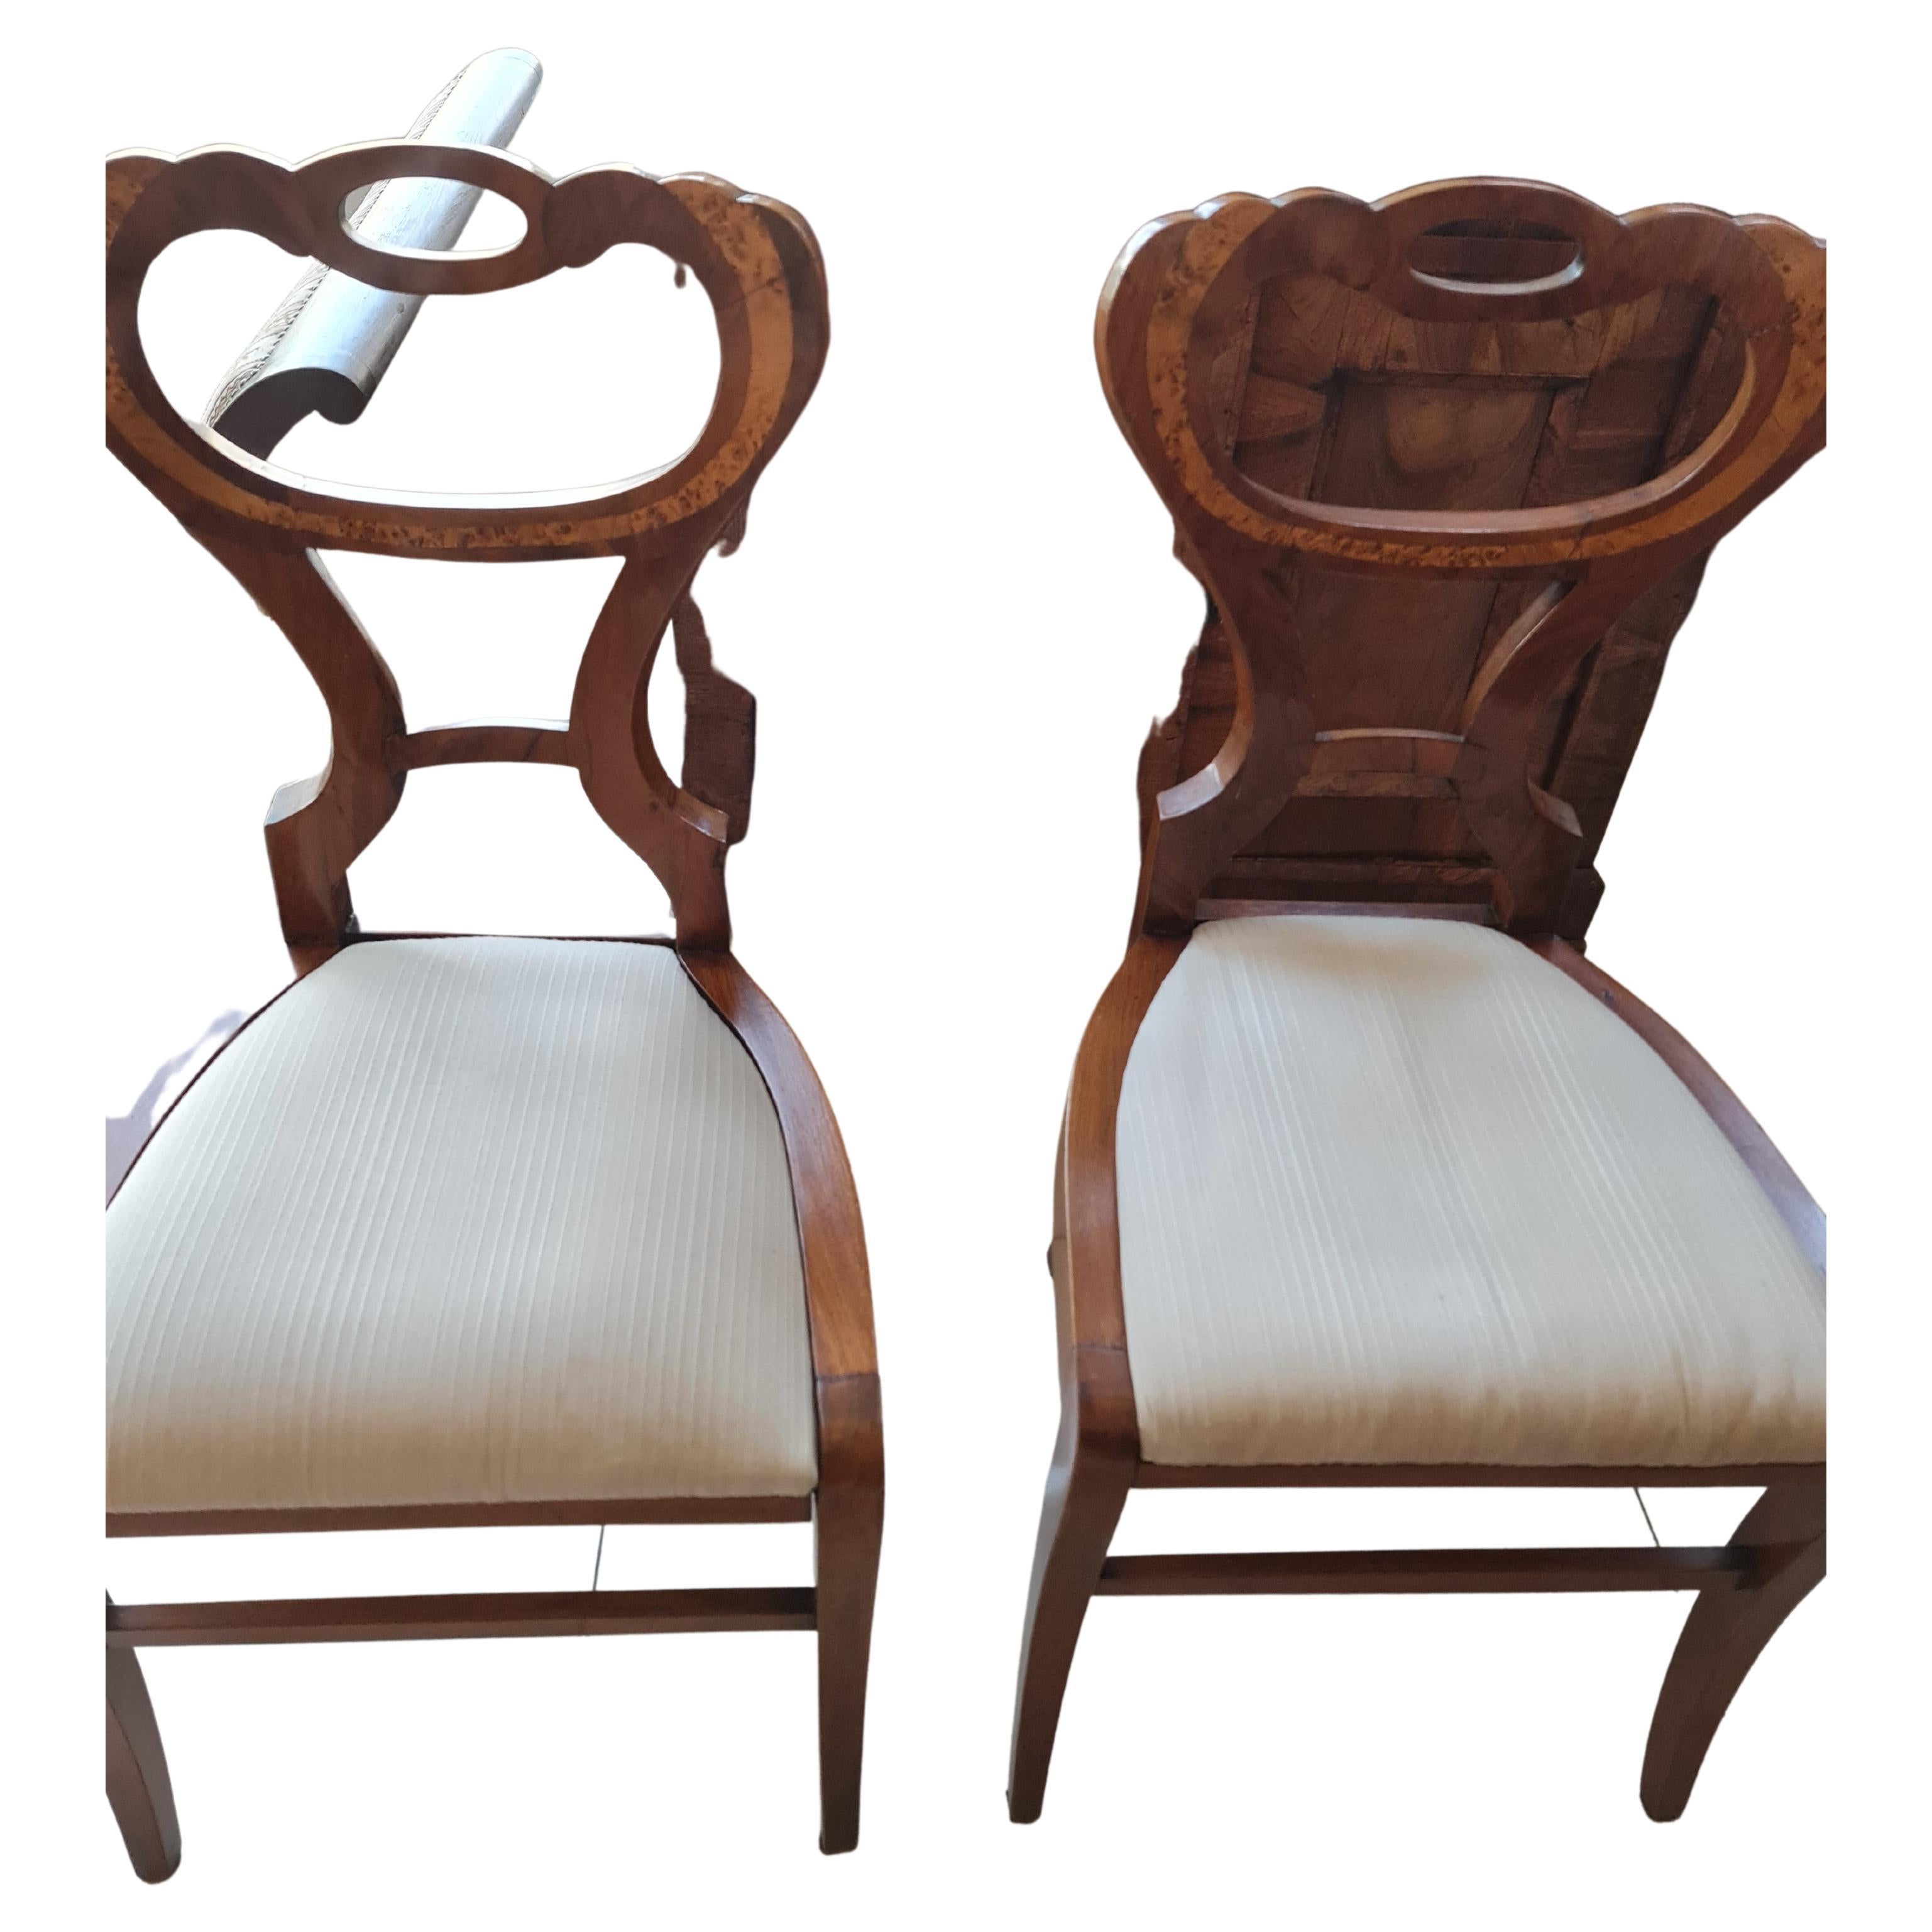 The presented piece is in an age-appropriate 
condition. 
The upholstery is clean , the chair can be used 
immediately

